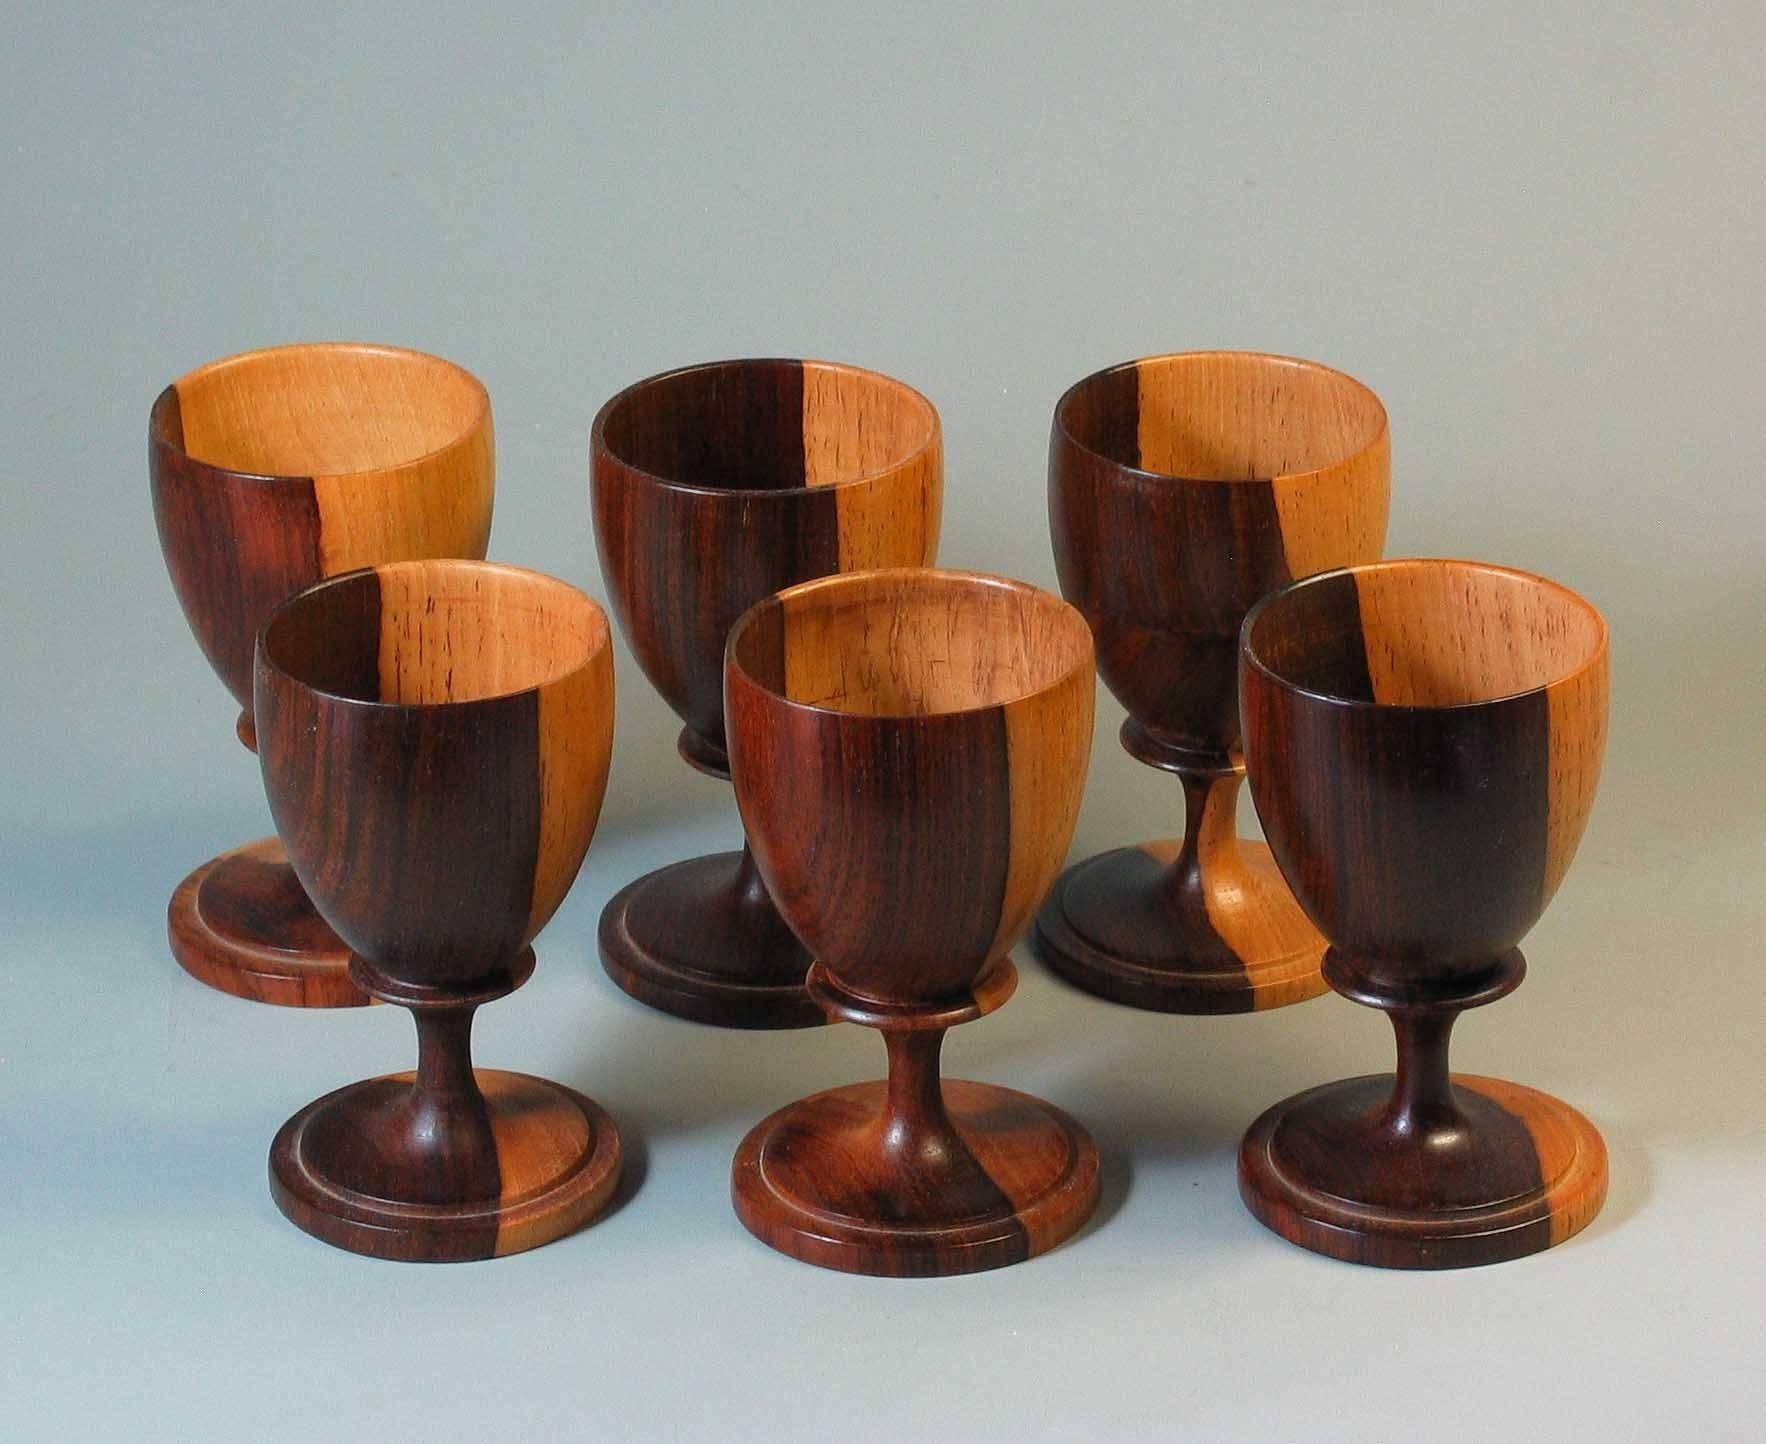 Turned Set of Six Lignum Vitae Goblets and Six Coasters with Storage Box, circa 1960 For Sale